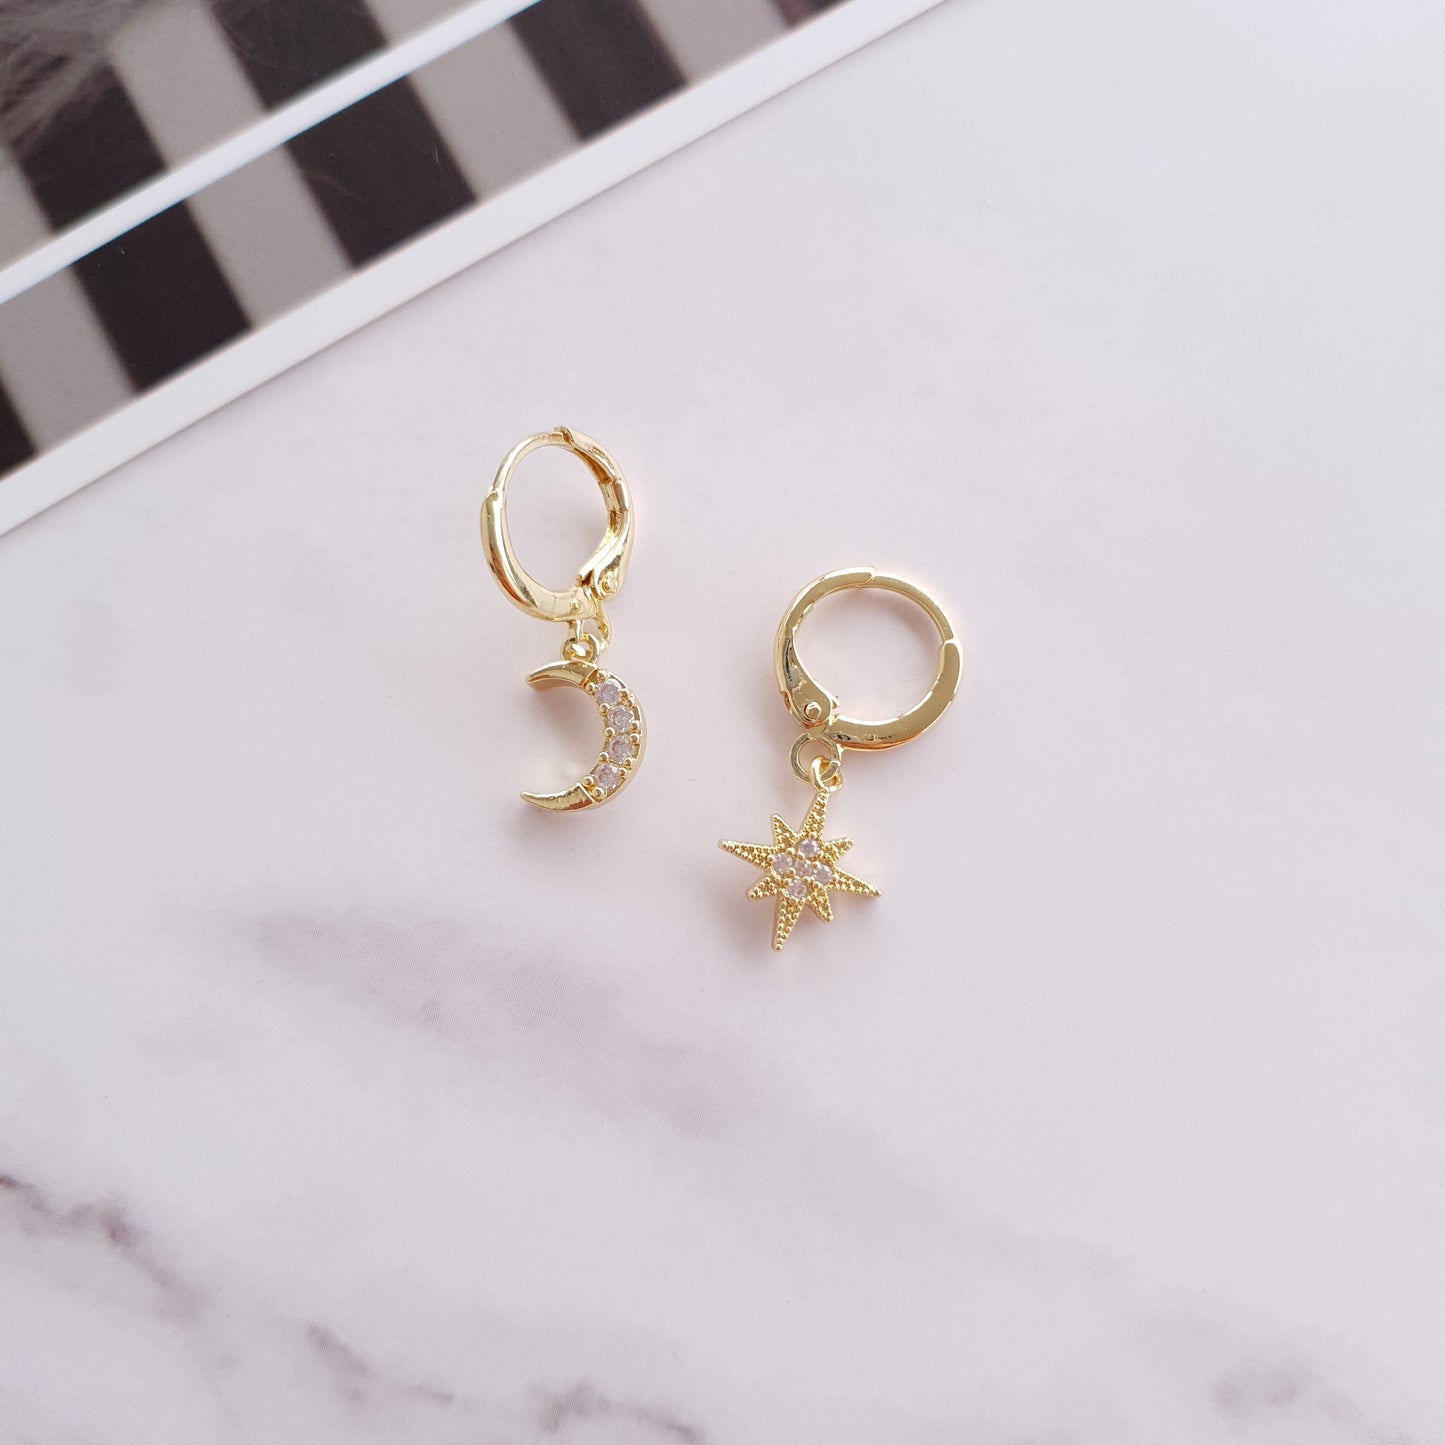 Moon and Star Huggies in Gold